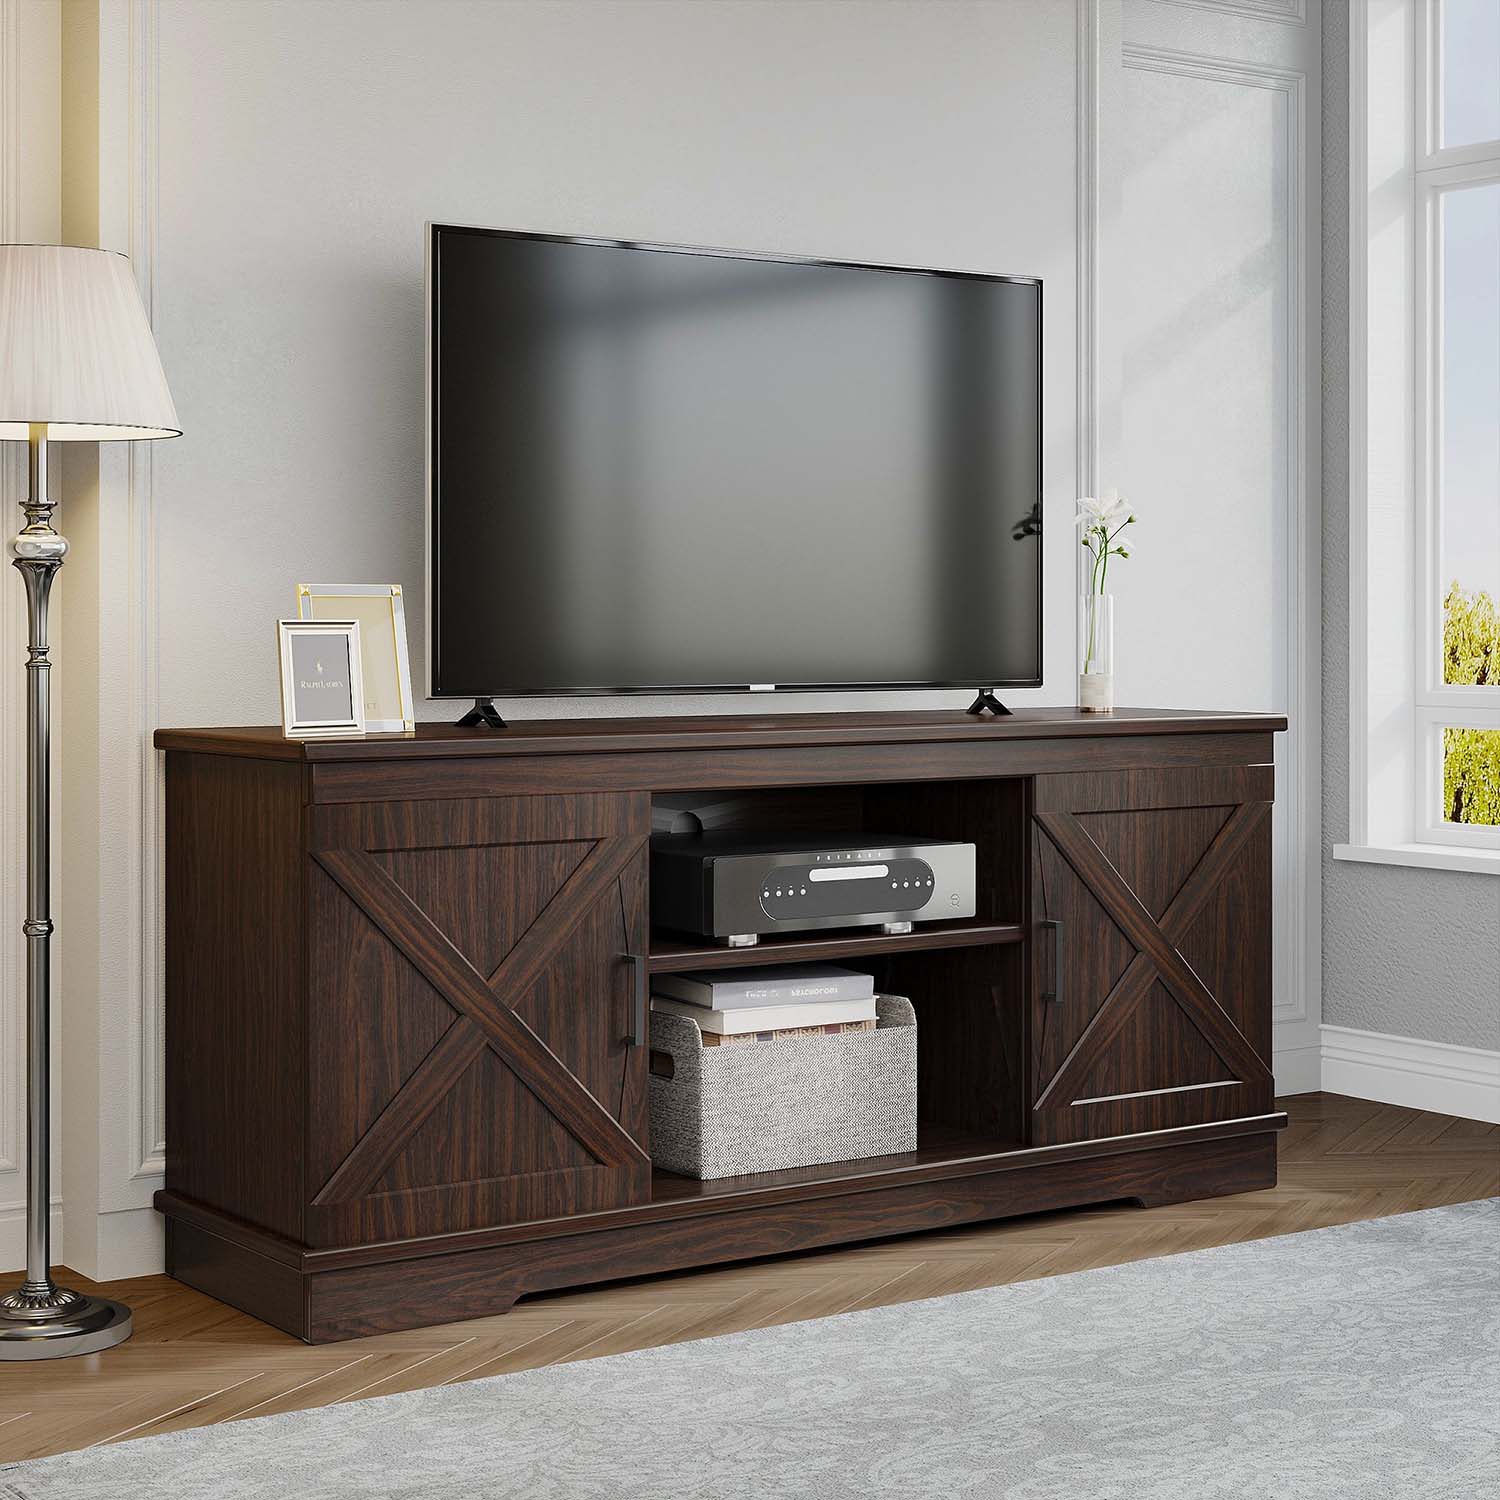 Belleze Farmhouse TV Stand for 65 inch TV